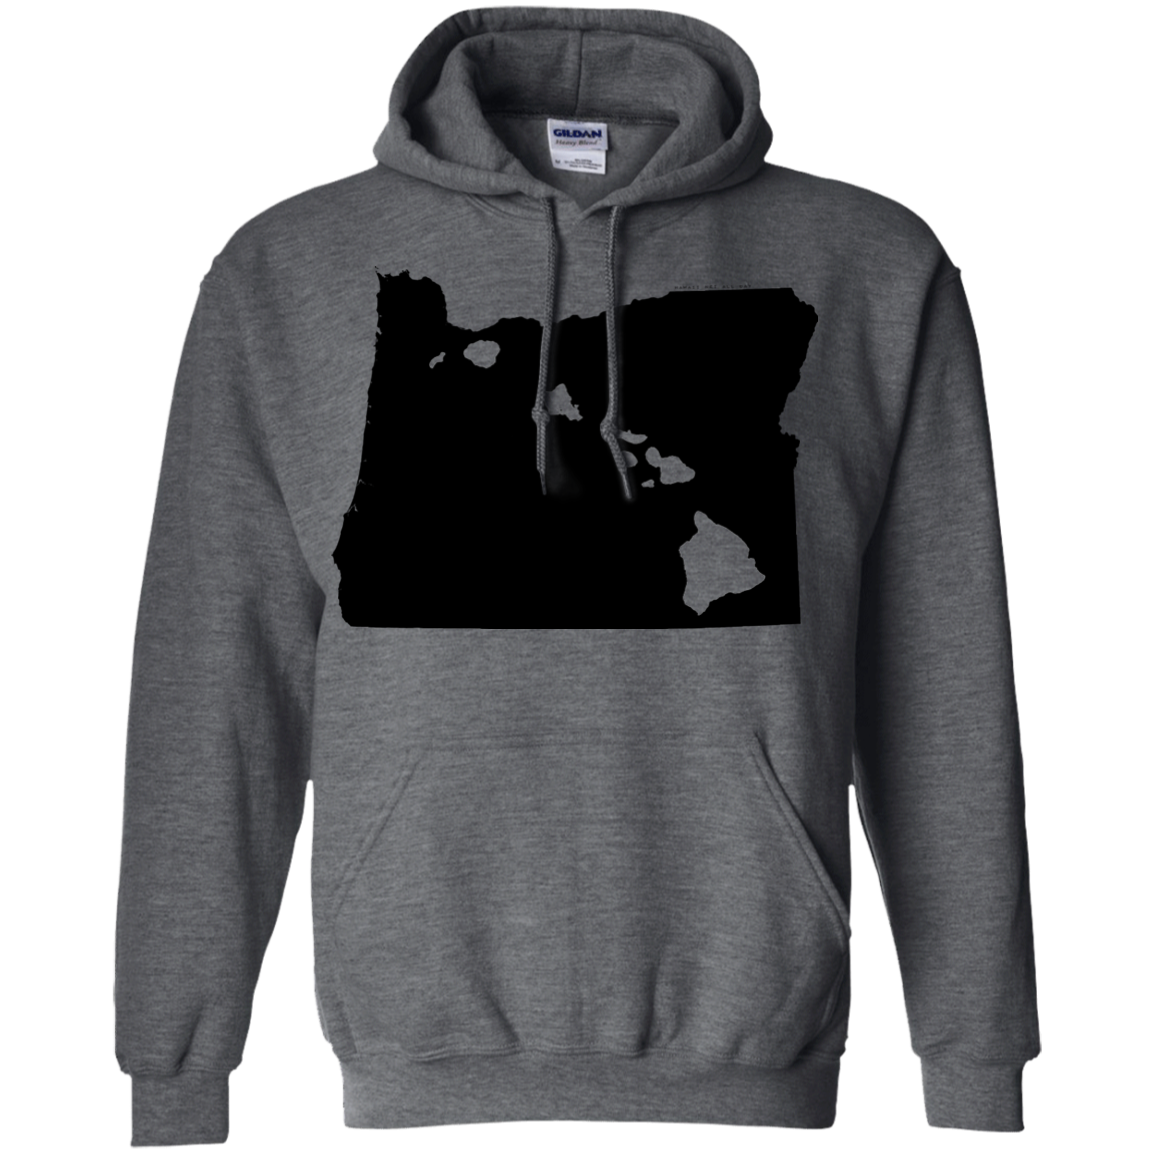 Living in Oregon with Hawaii Roots Pullover Hoodie 8 oz., Sweatshirts, Hawaii Nei All Day